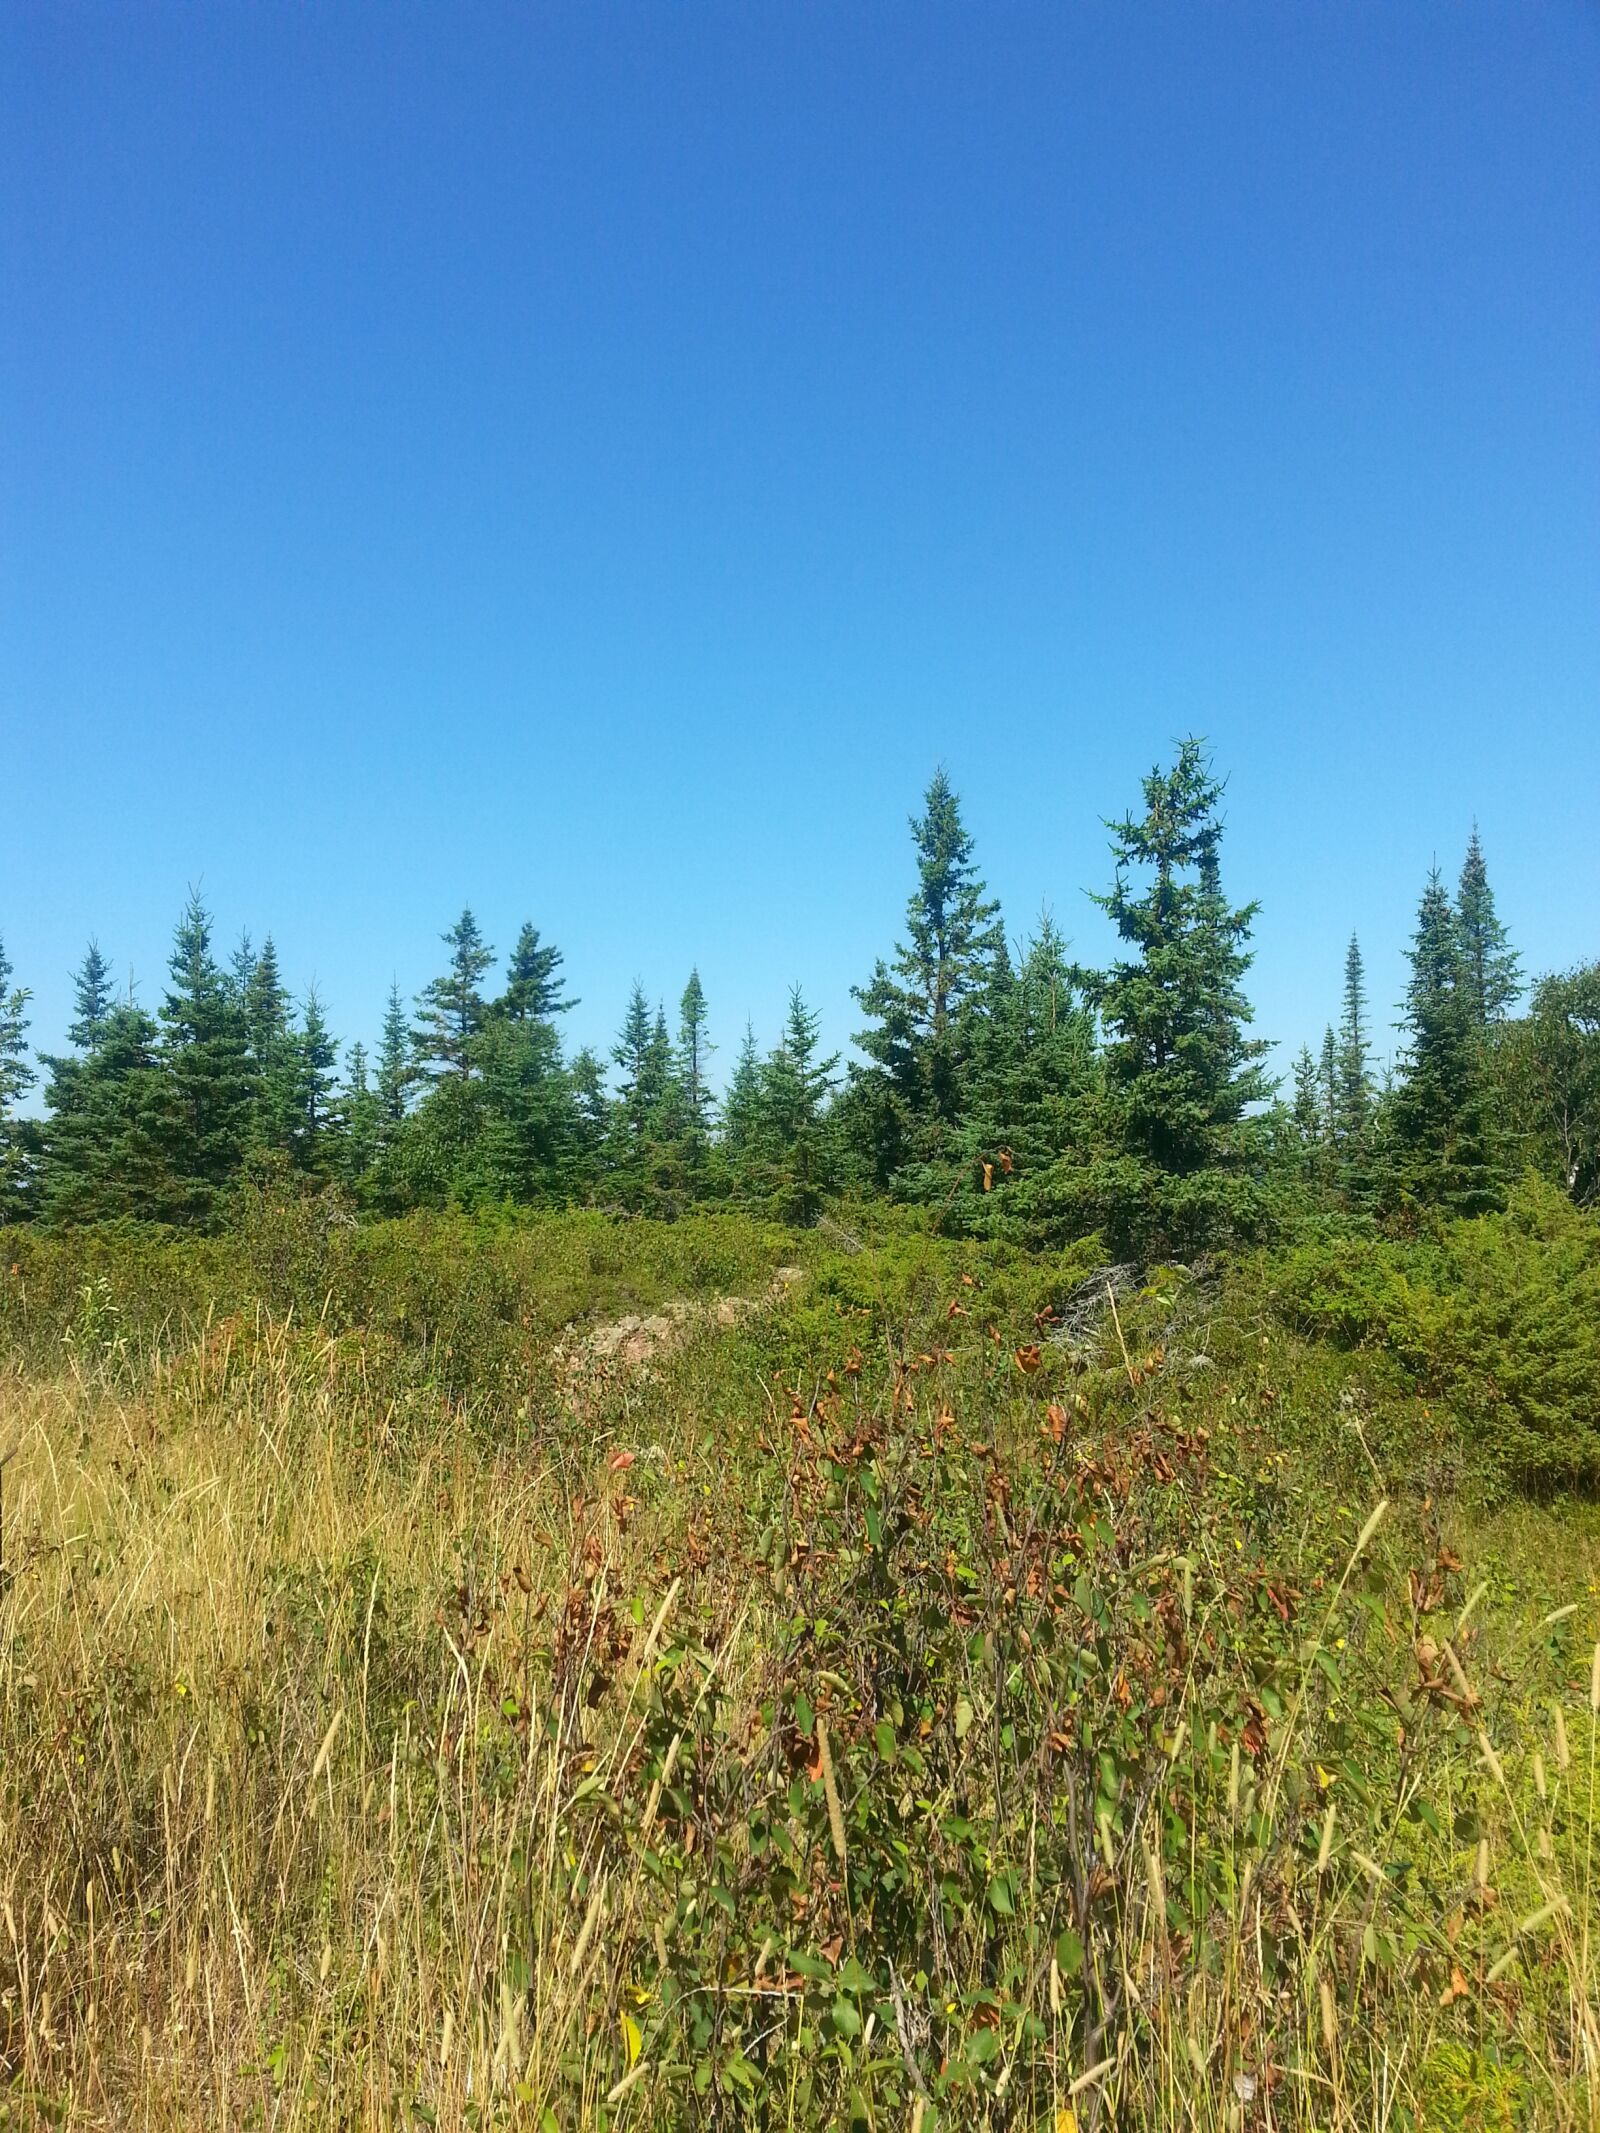 Samsung Galaxy S3 sample photo. Up mi, meadow, nature photography